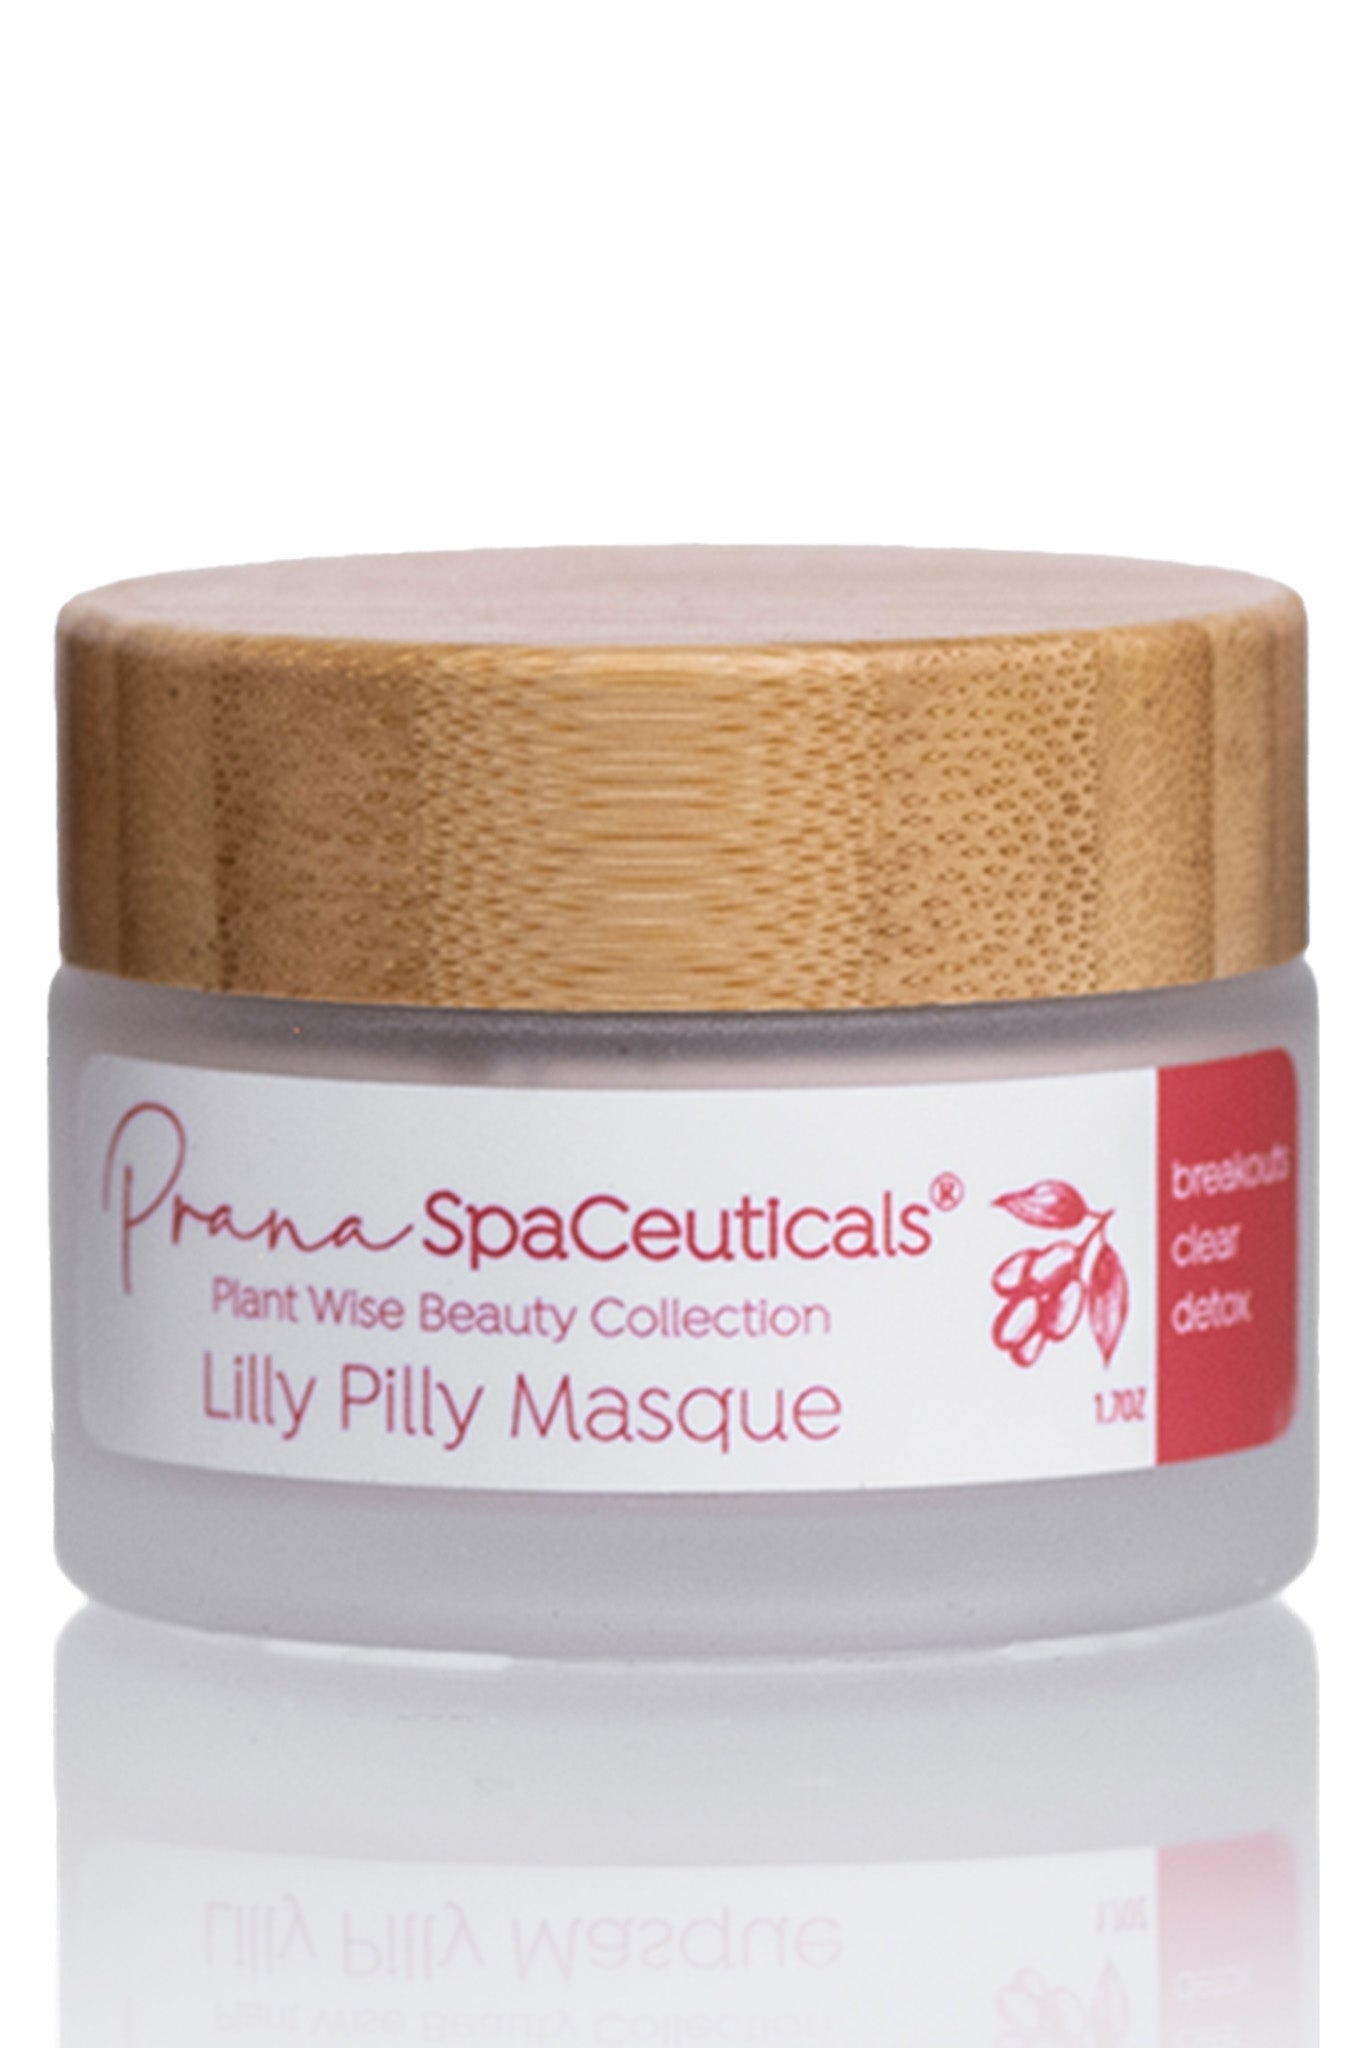 PLANT WISE BEAUTY COLLECTION: Lilly Pilly Masque